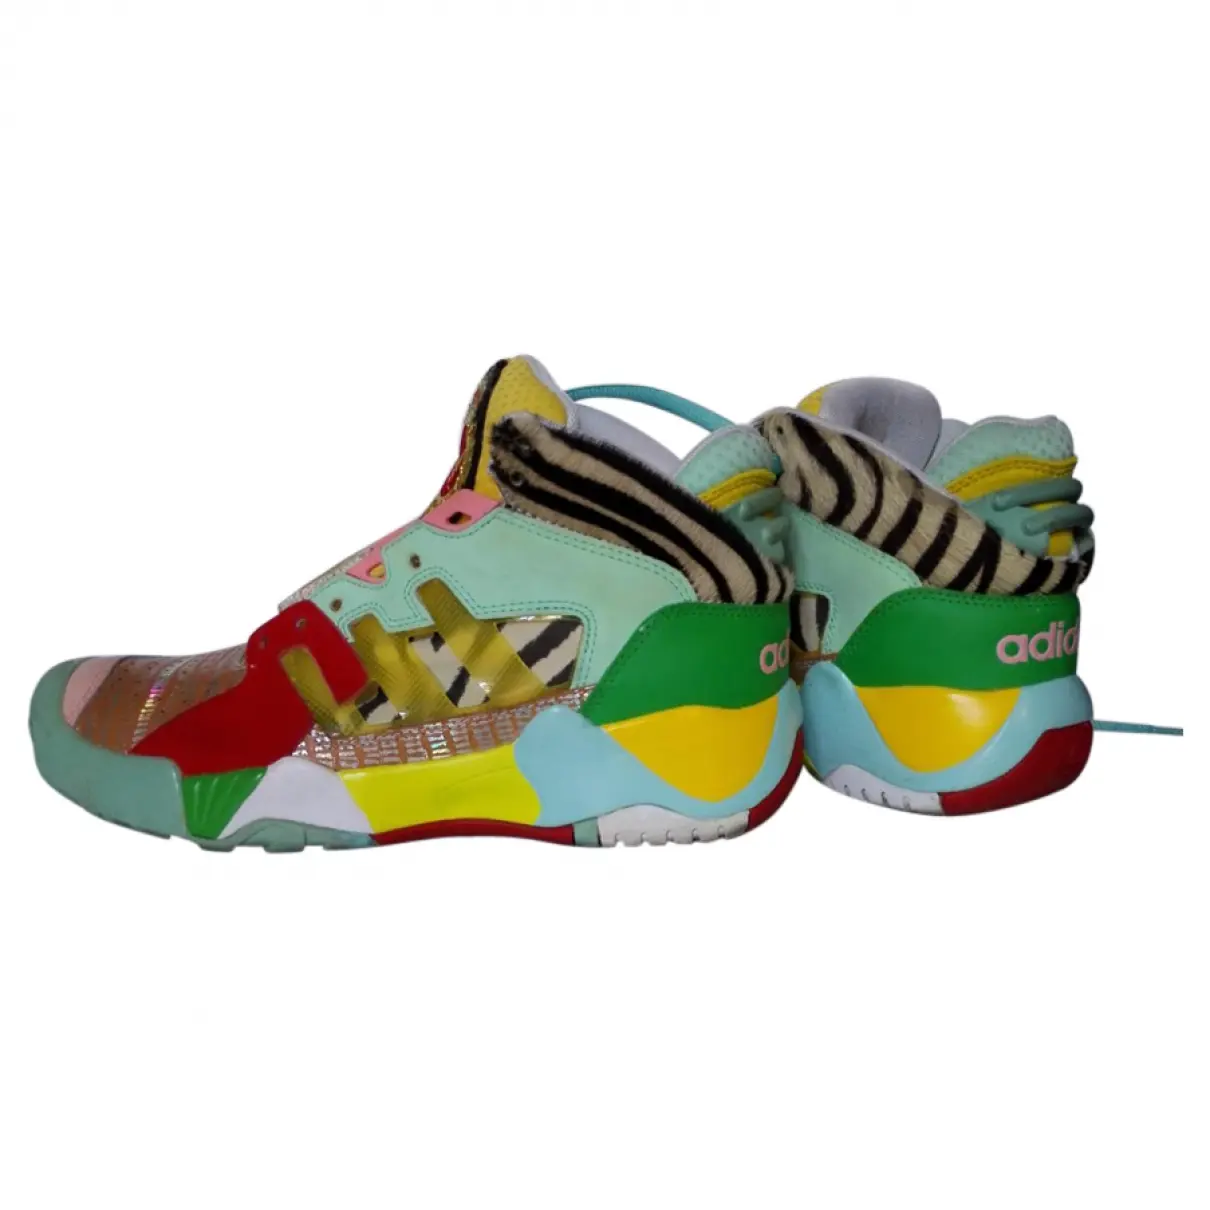 Yellow Leather Trainers Jeremy Scott Pour Adidas